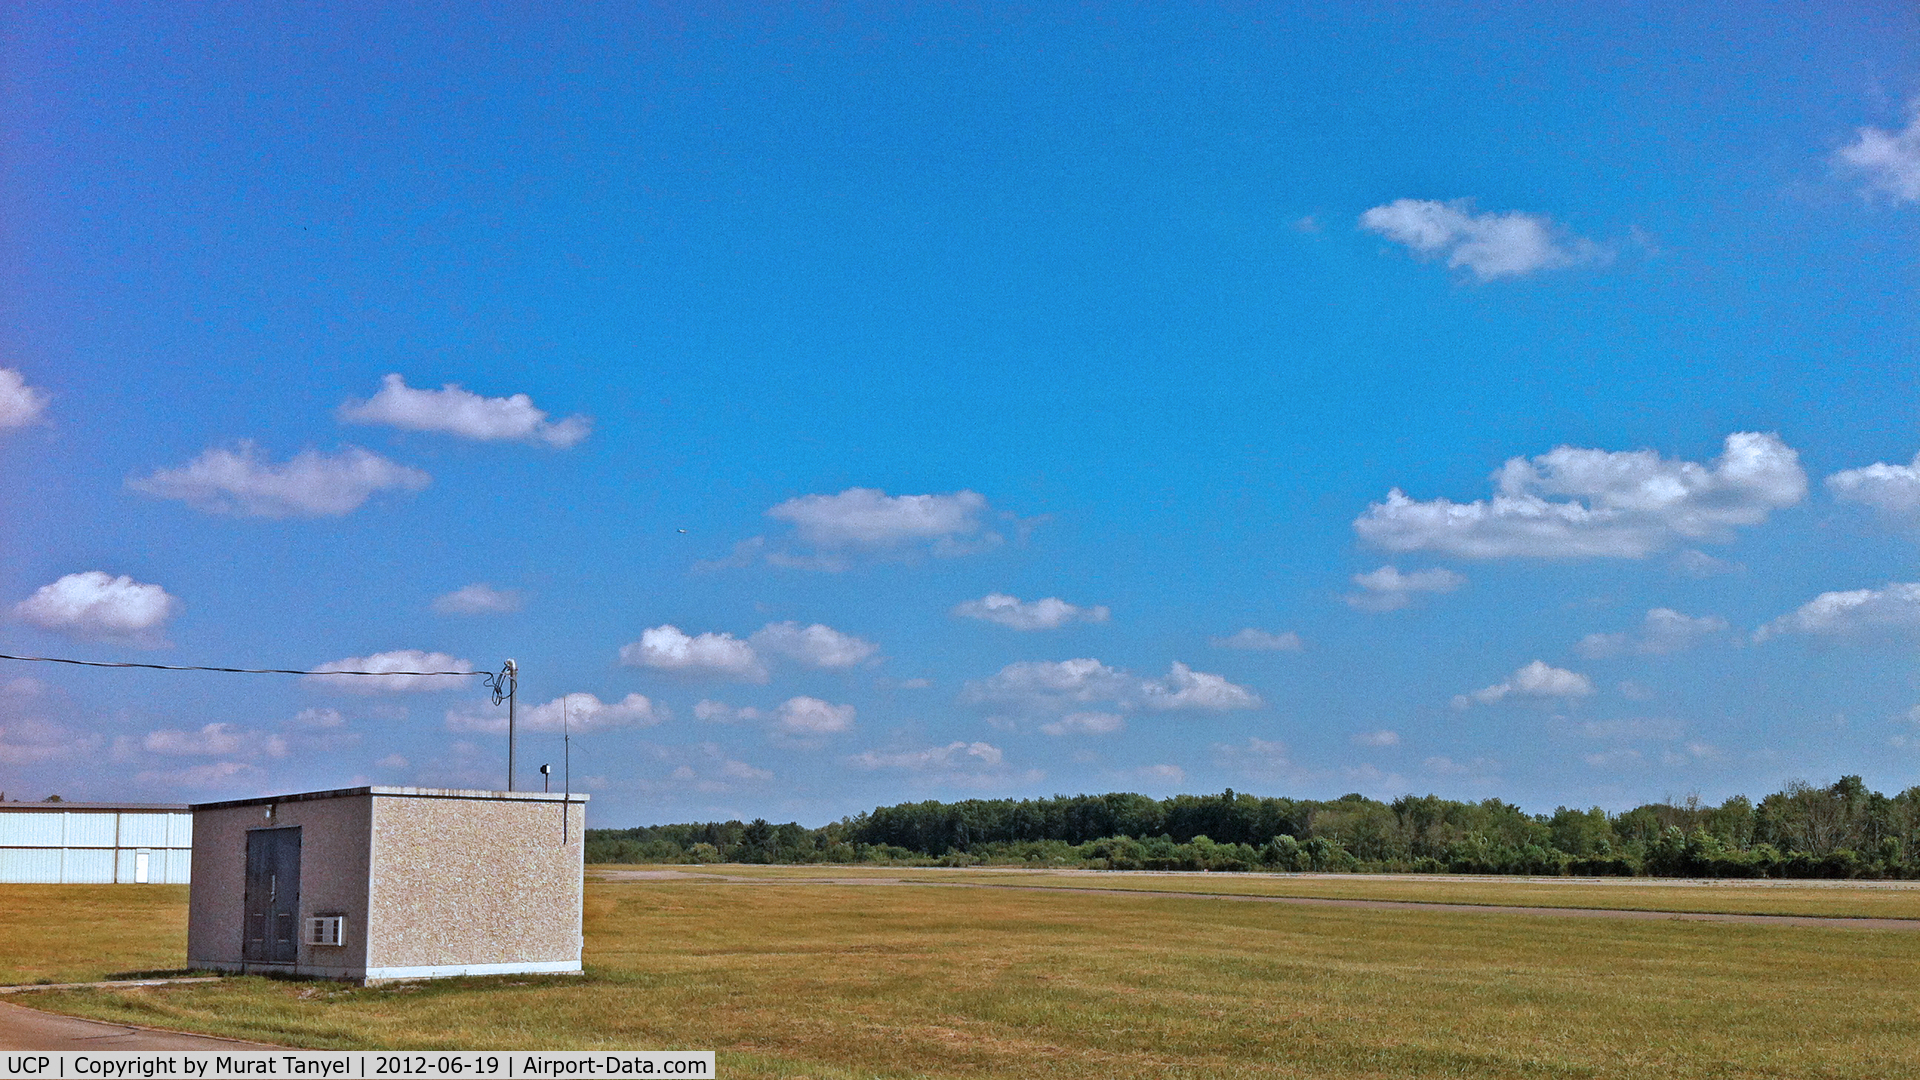 New Castle Municipal Airport (UCP) - Not much of an airport, is it?